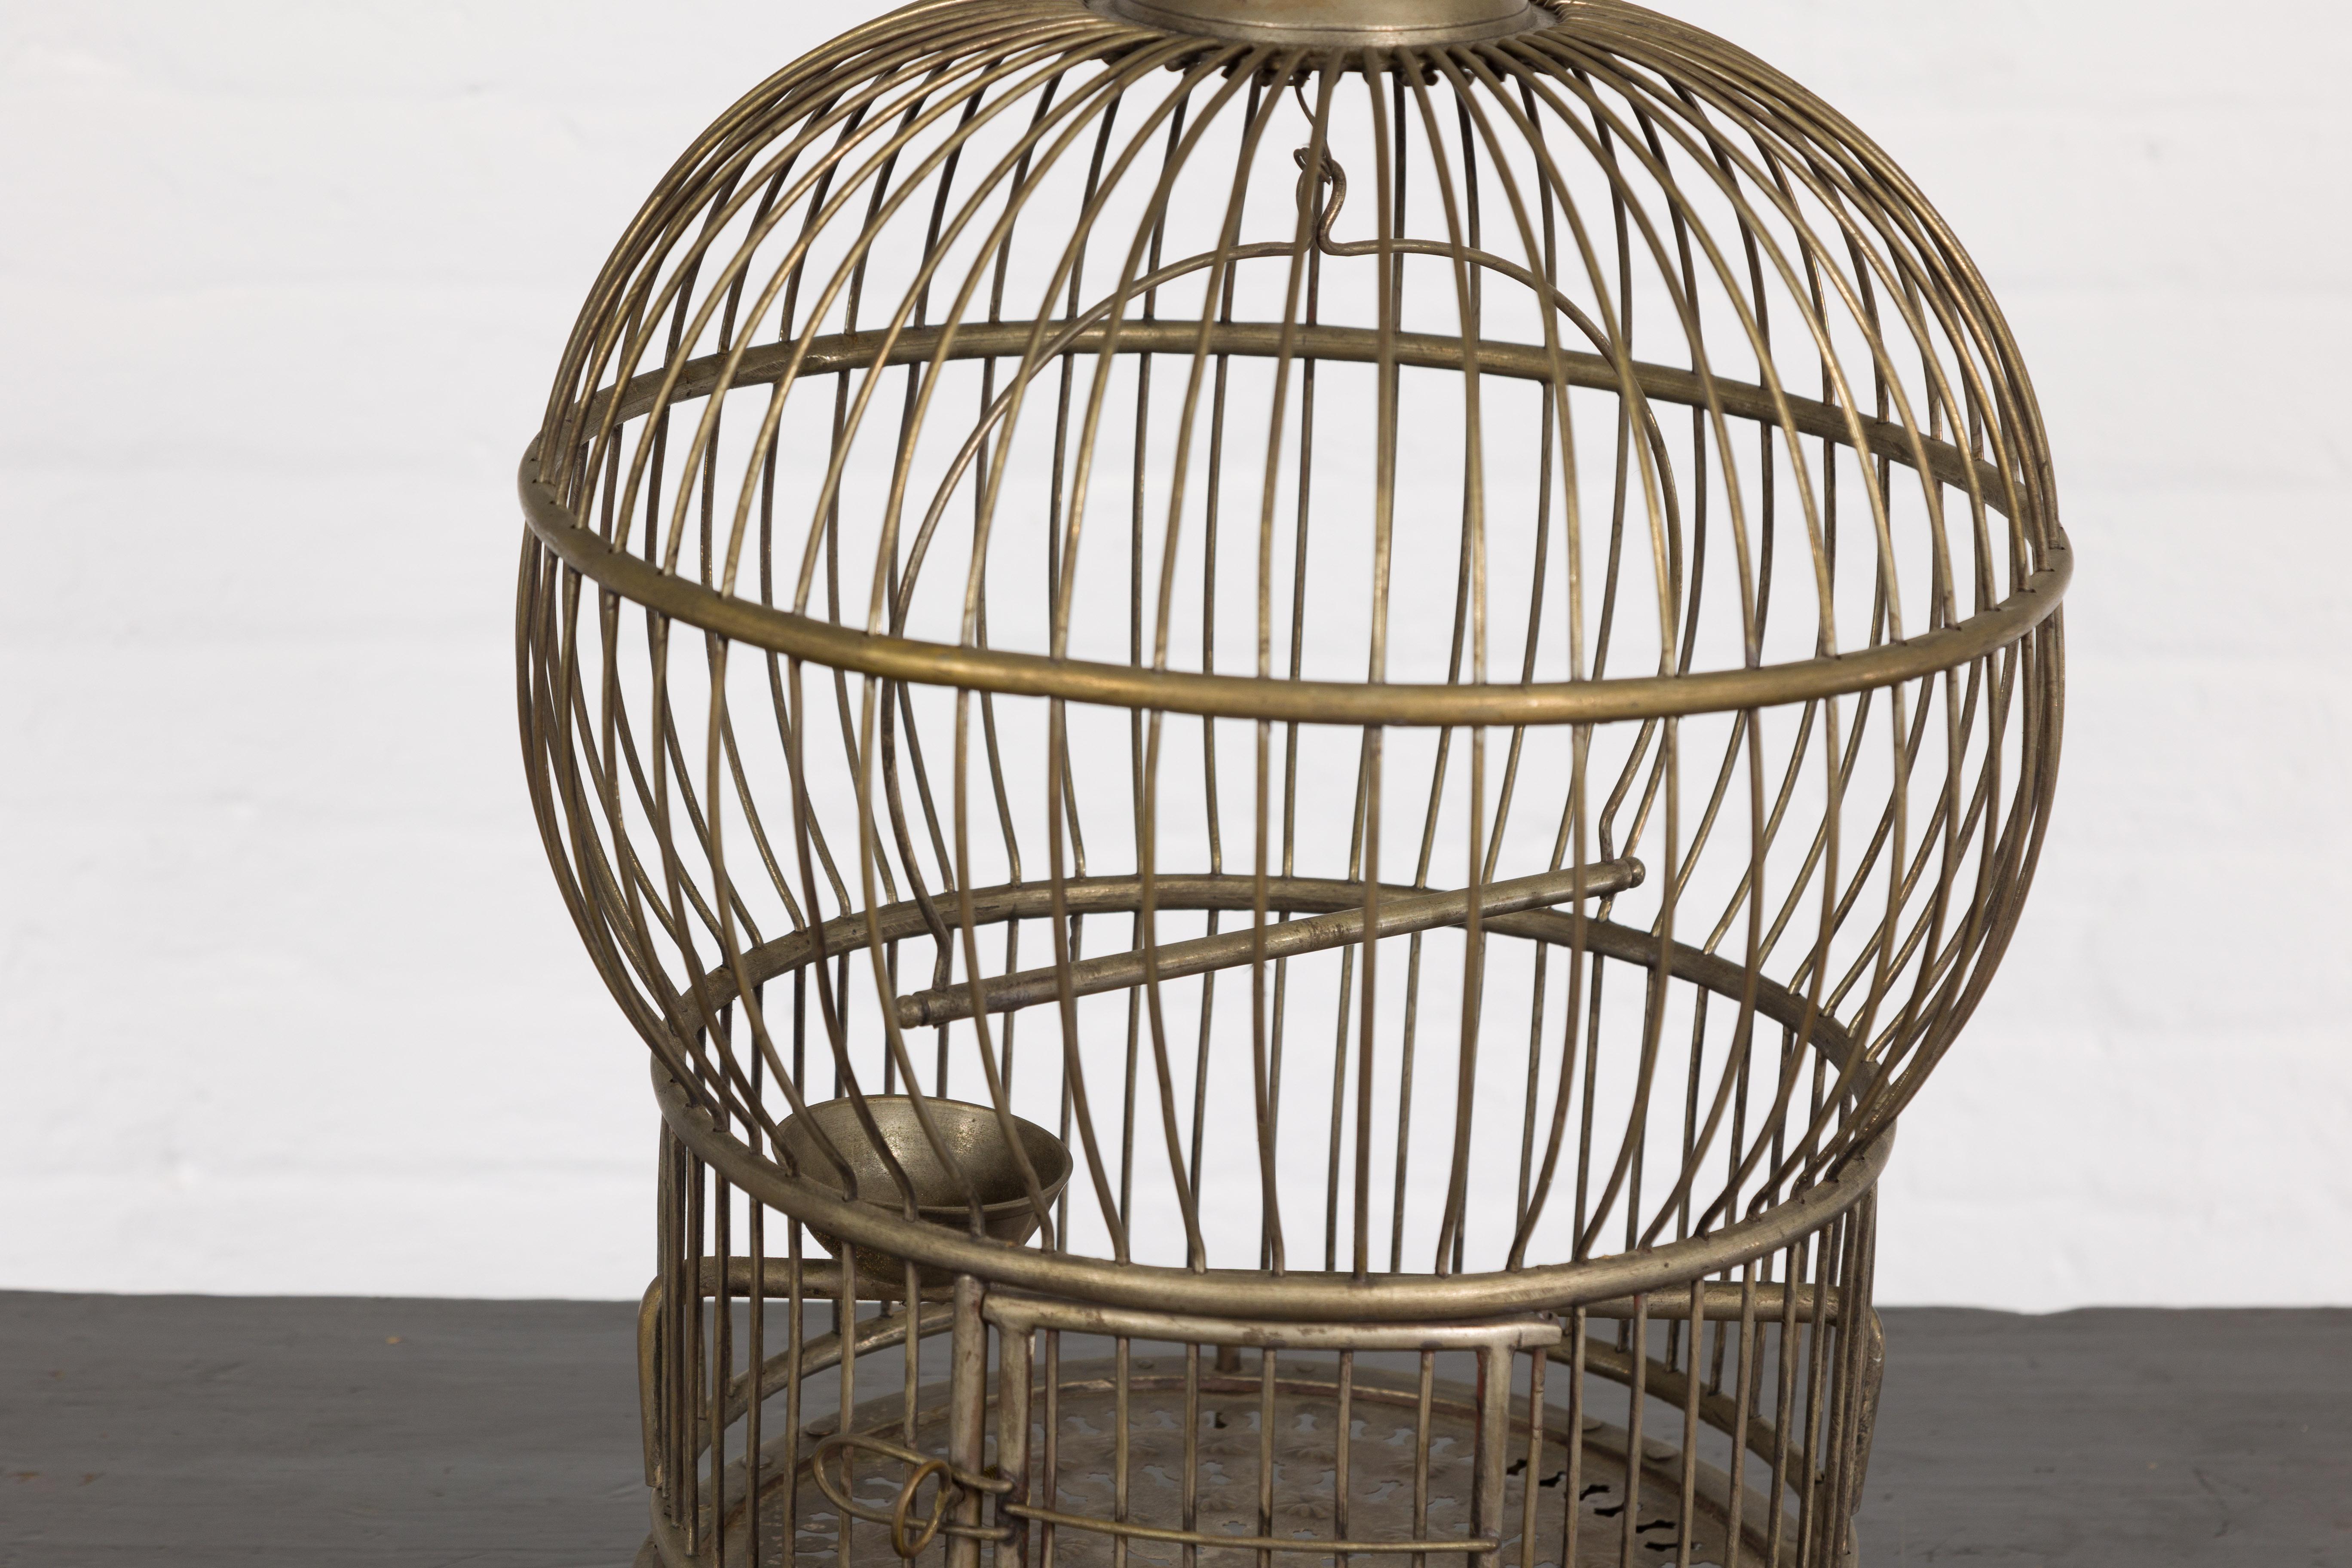 20th Century Indian Antique Silver over Brass Montgolfière Shaped Bird Cage with Pierced Feet